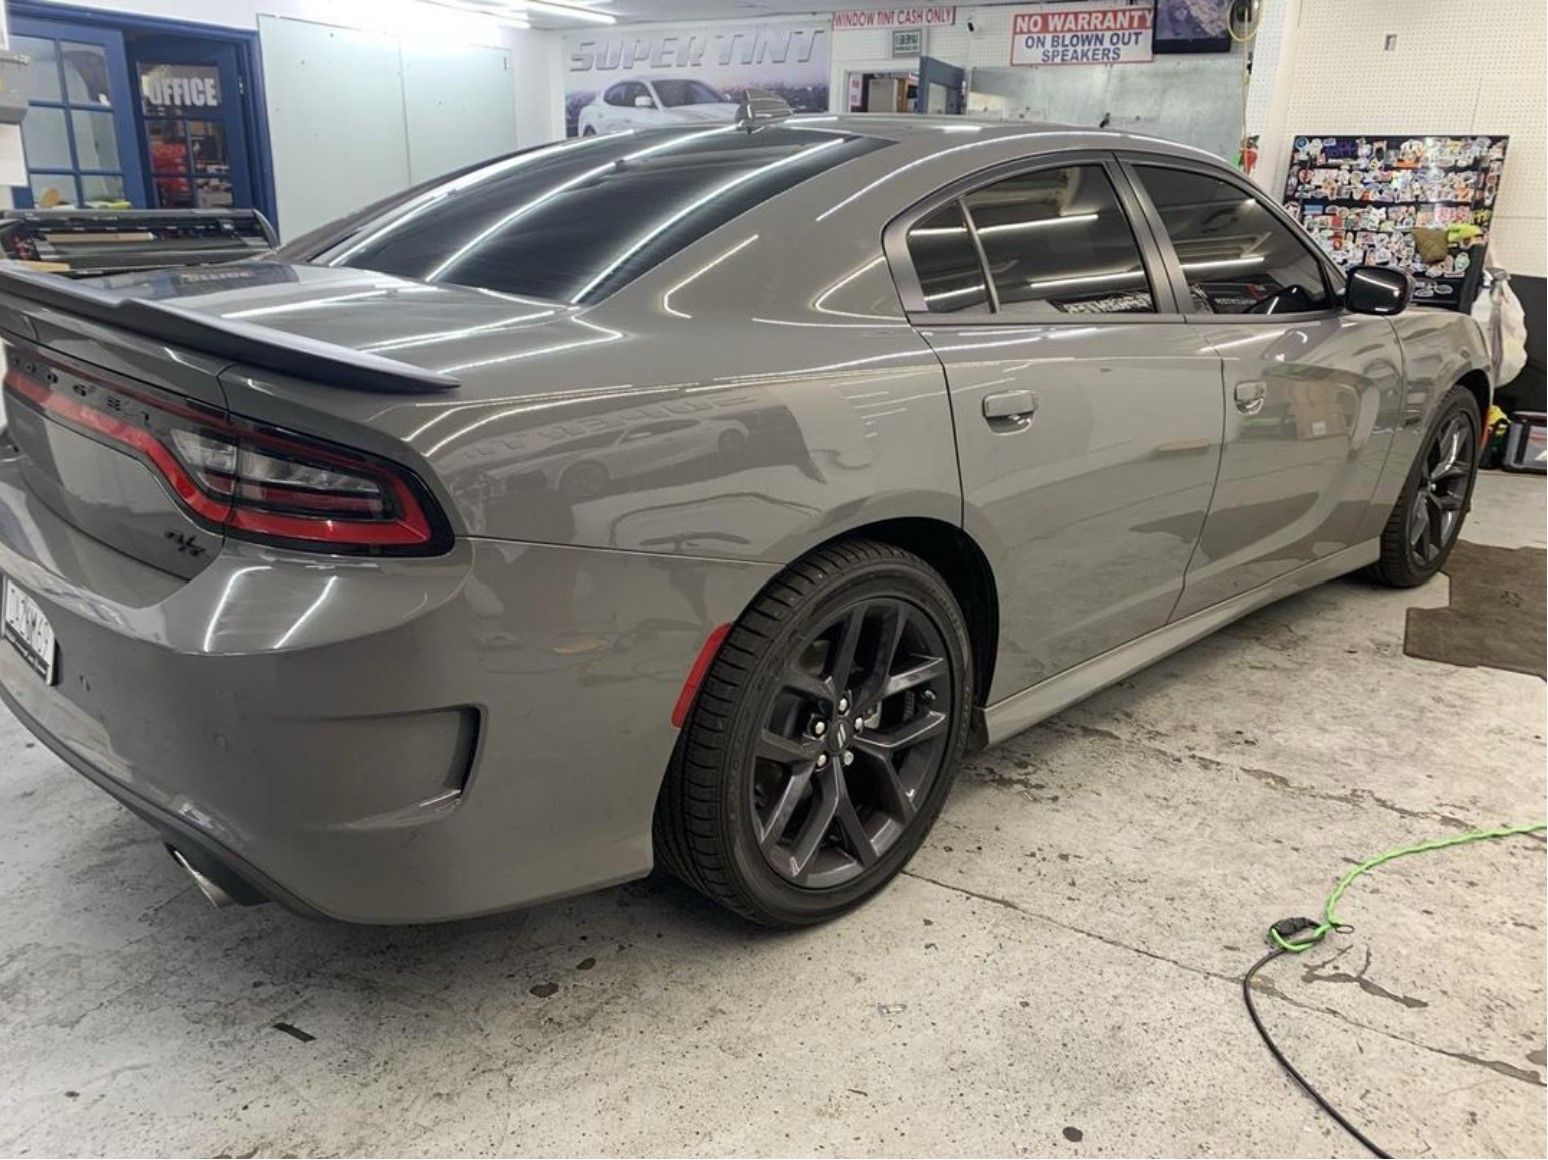 Window tinted on a dodge charger